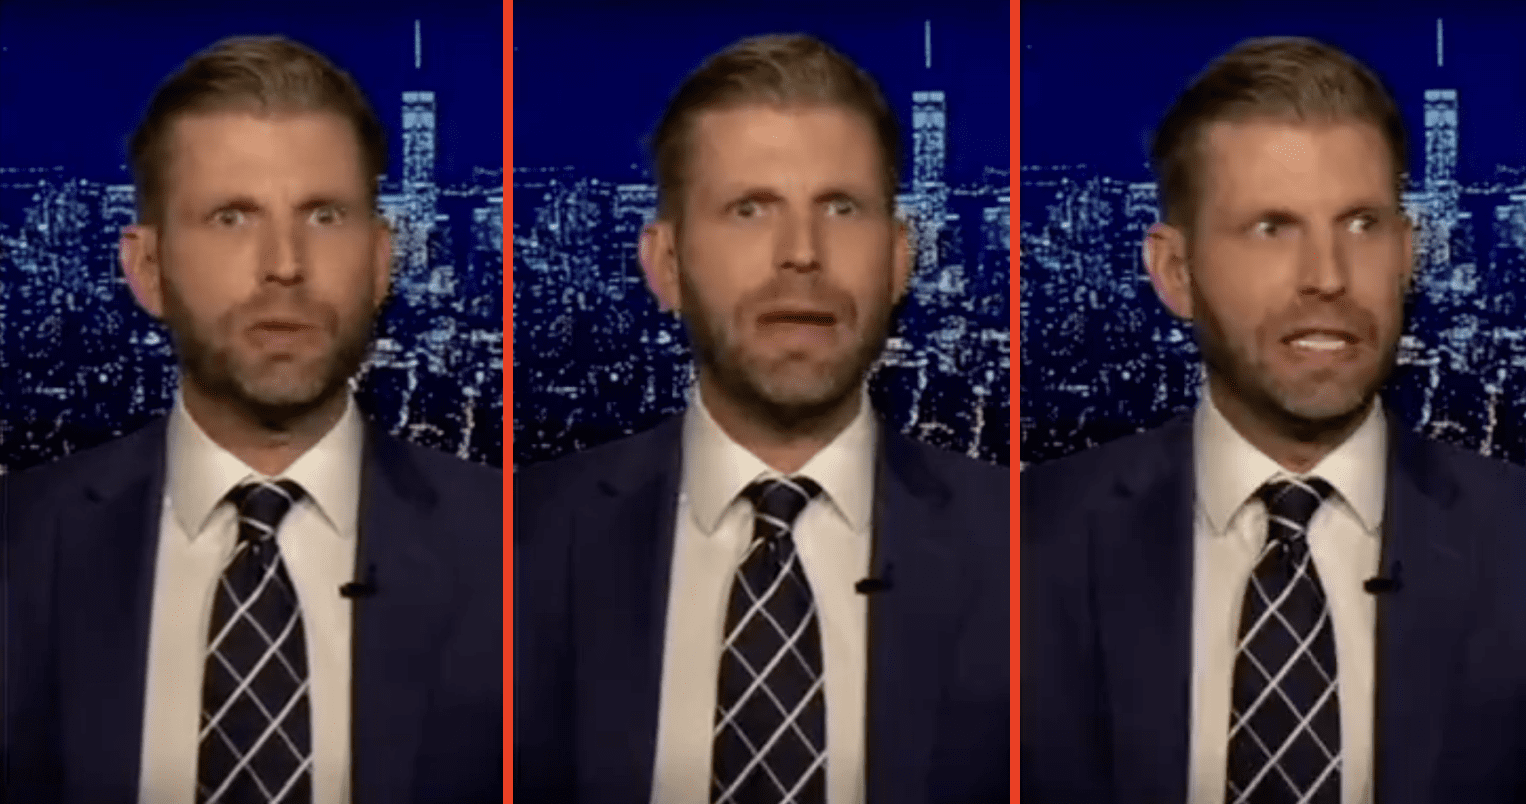 You are currently viewing Someone might want to check on Eric Trump this morning because he looked absolutely psychotic on TV last night